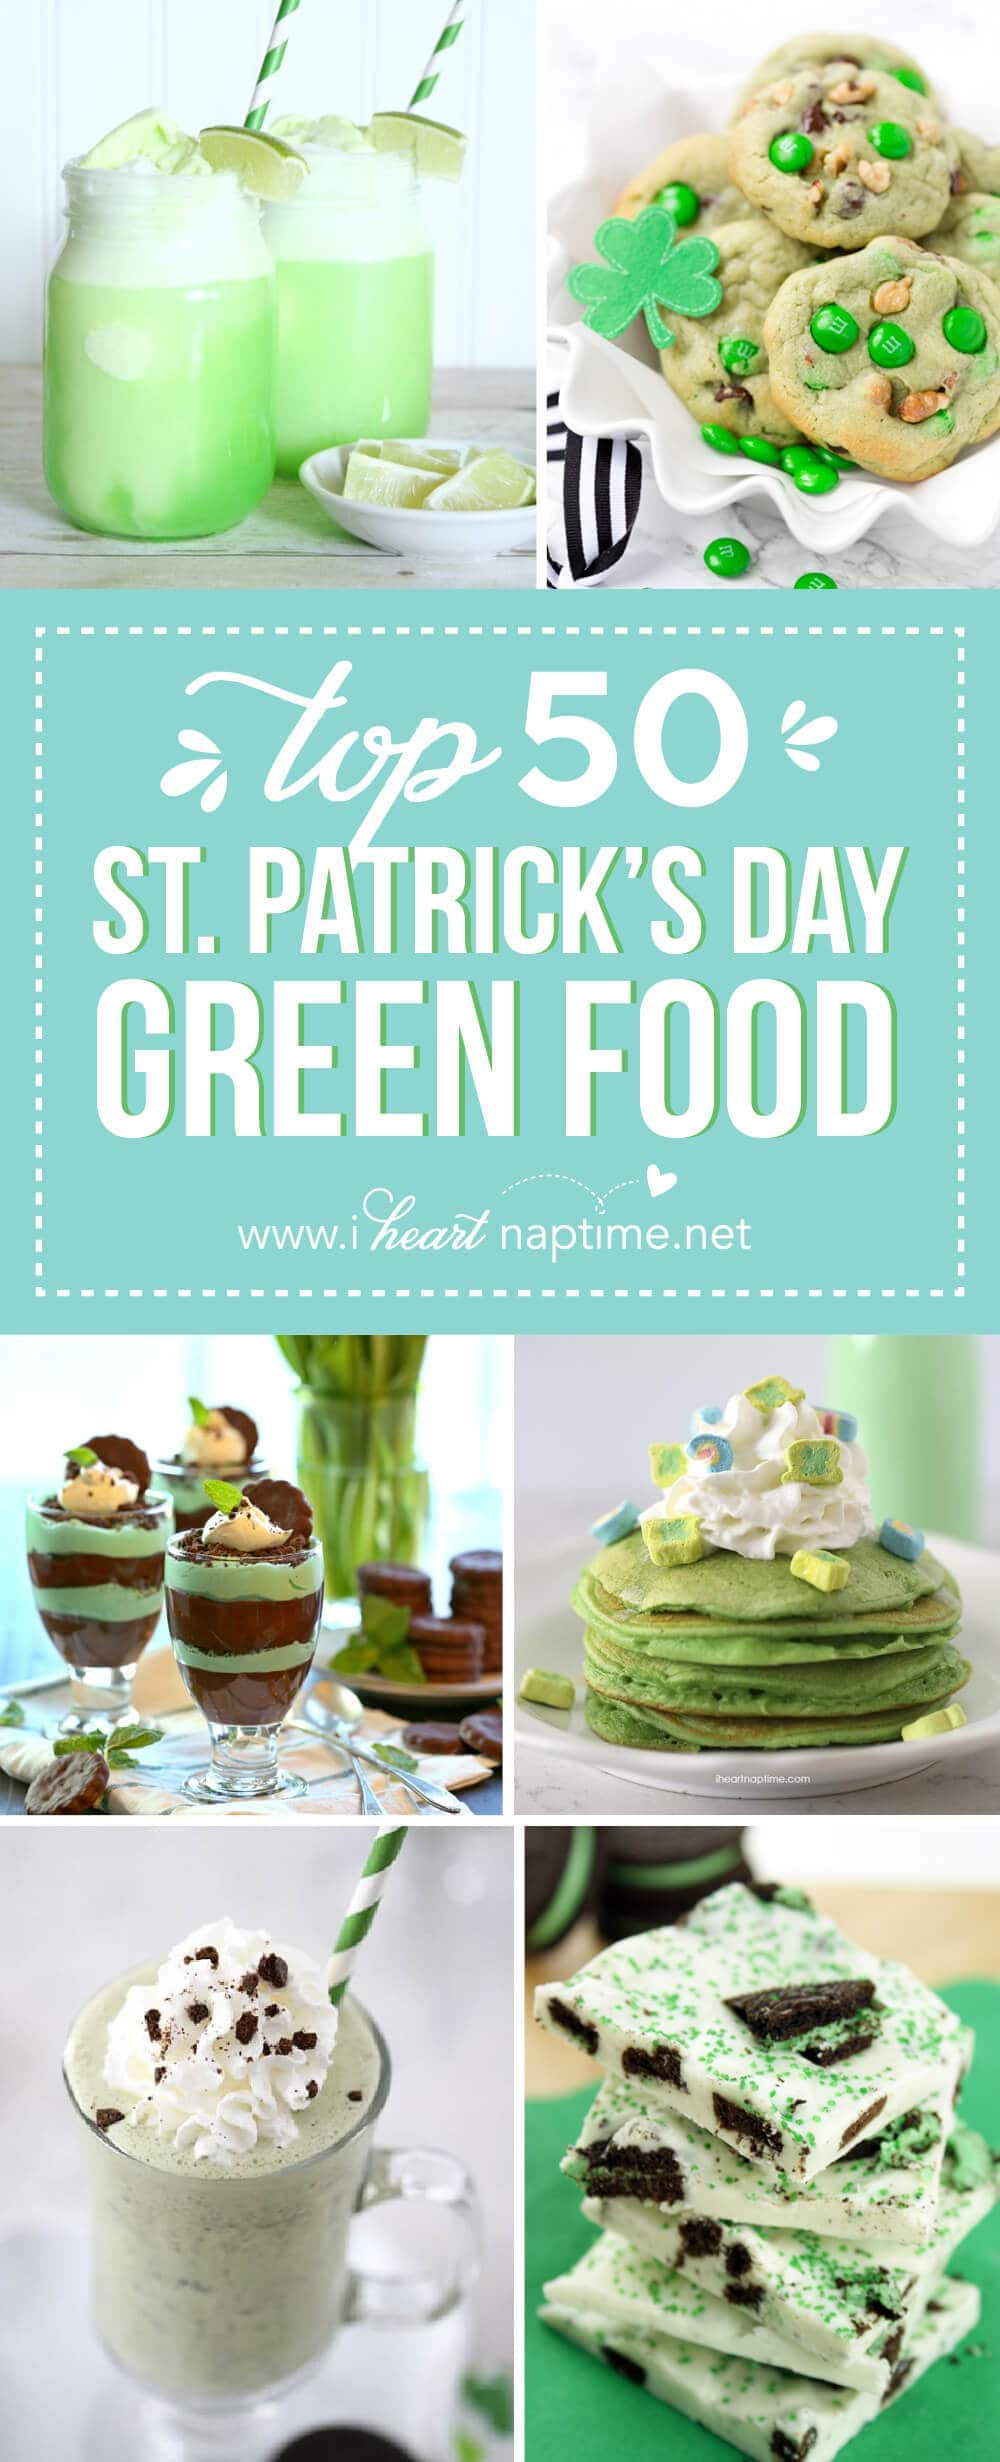 Green Food For St Patrick's Day
 Top 50 St Patrick s Day Green Food I Heart Nap Time